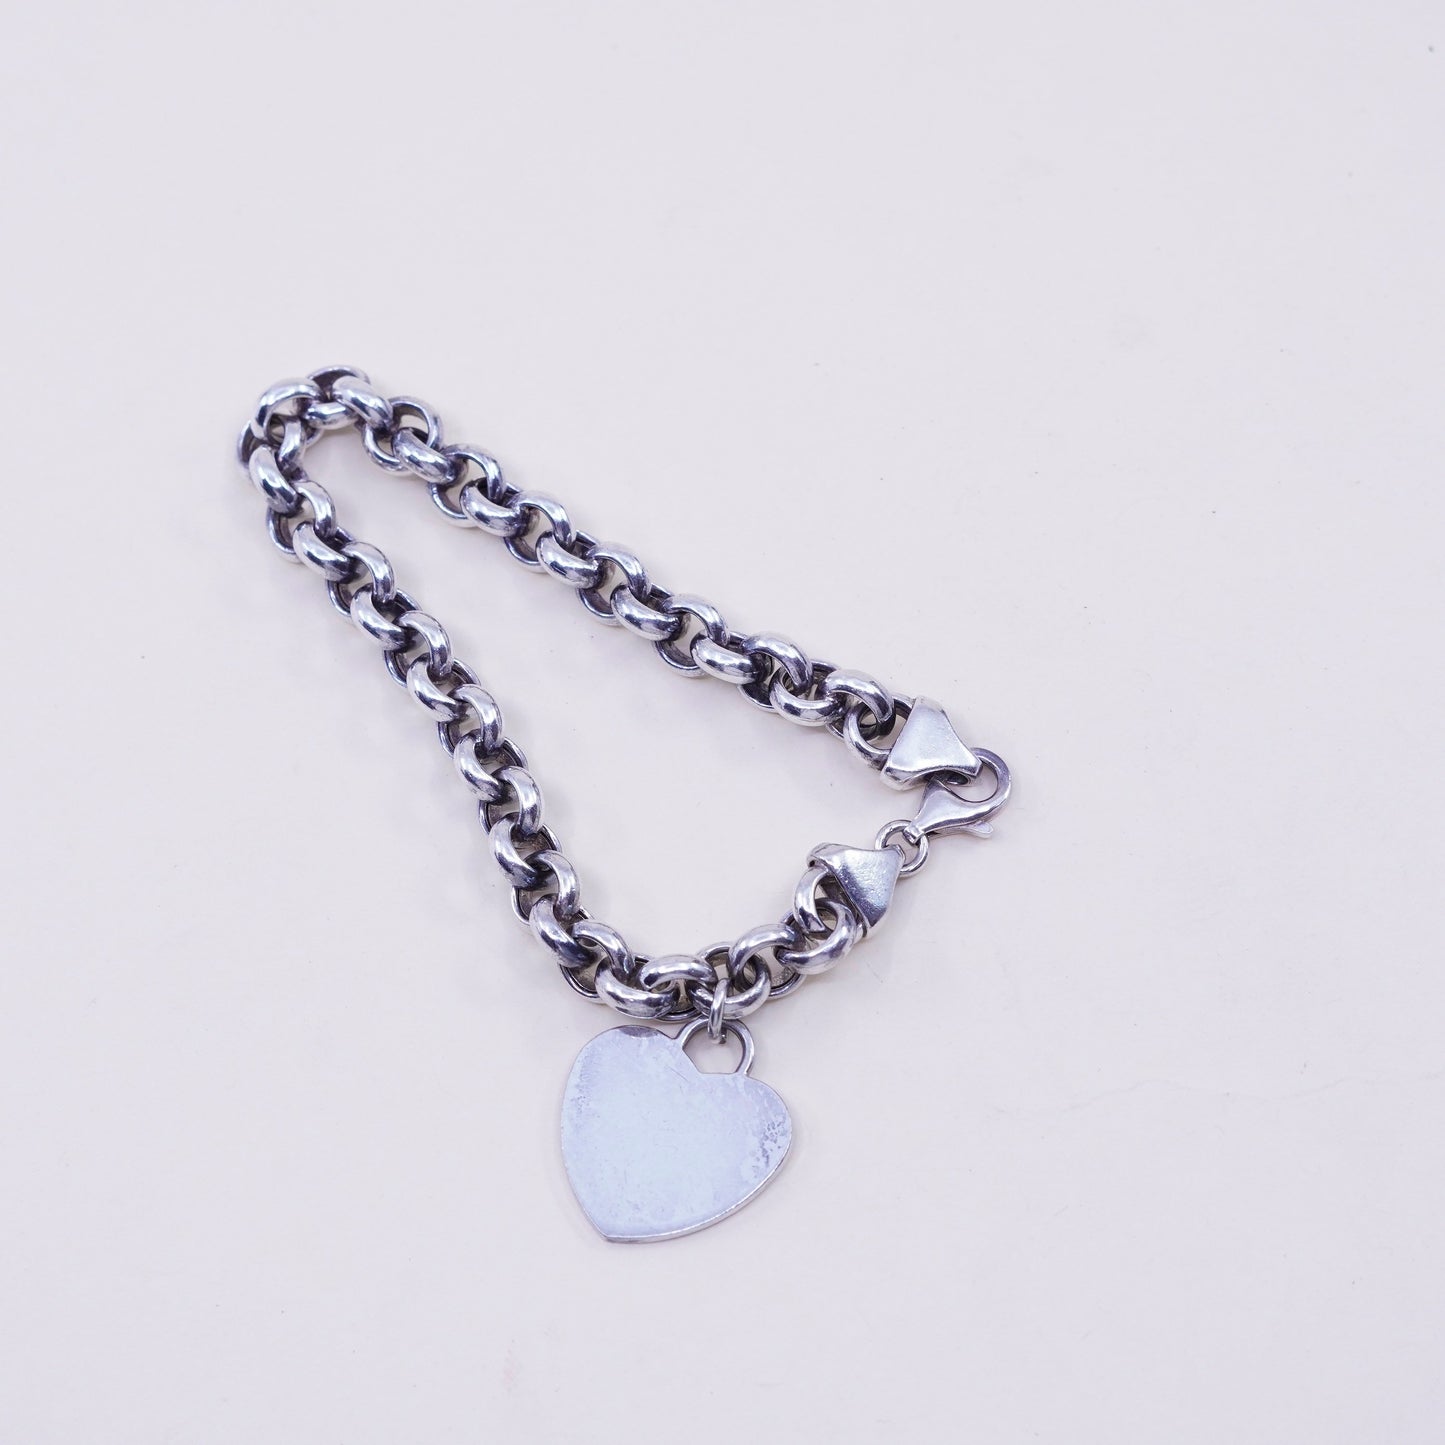 7”, 8mm, sterling silver circle bracelet, 925 chain heart charm toggle closure